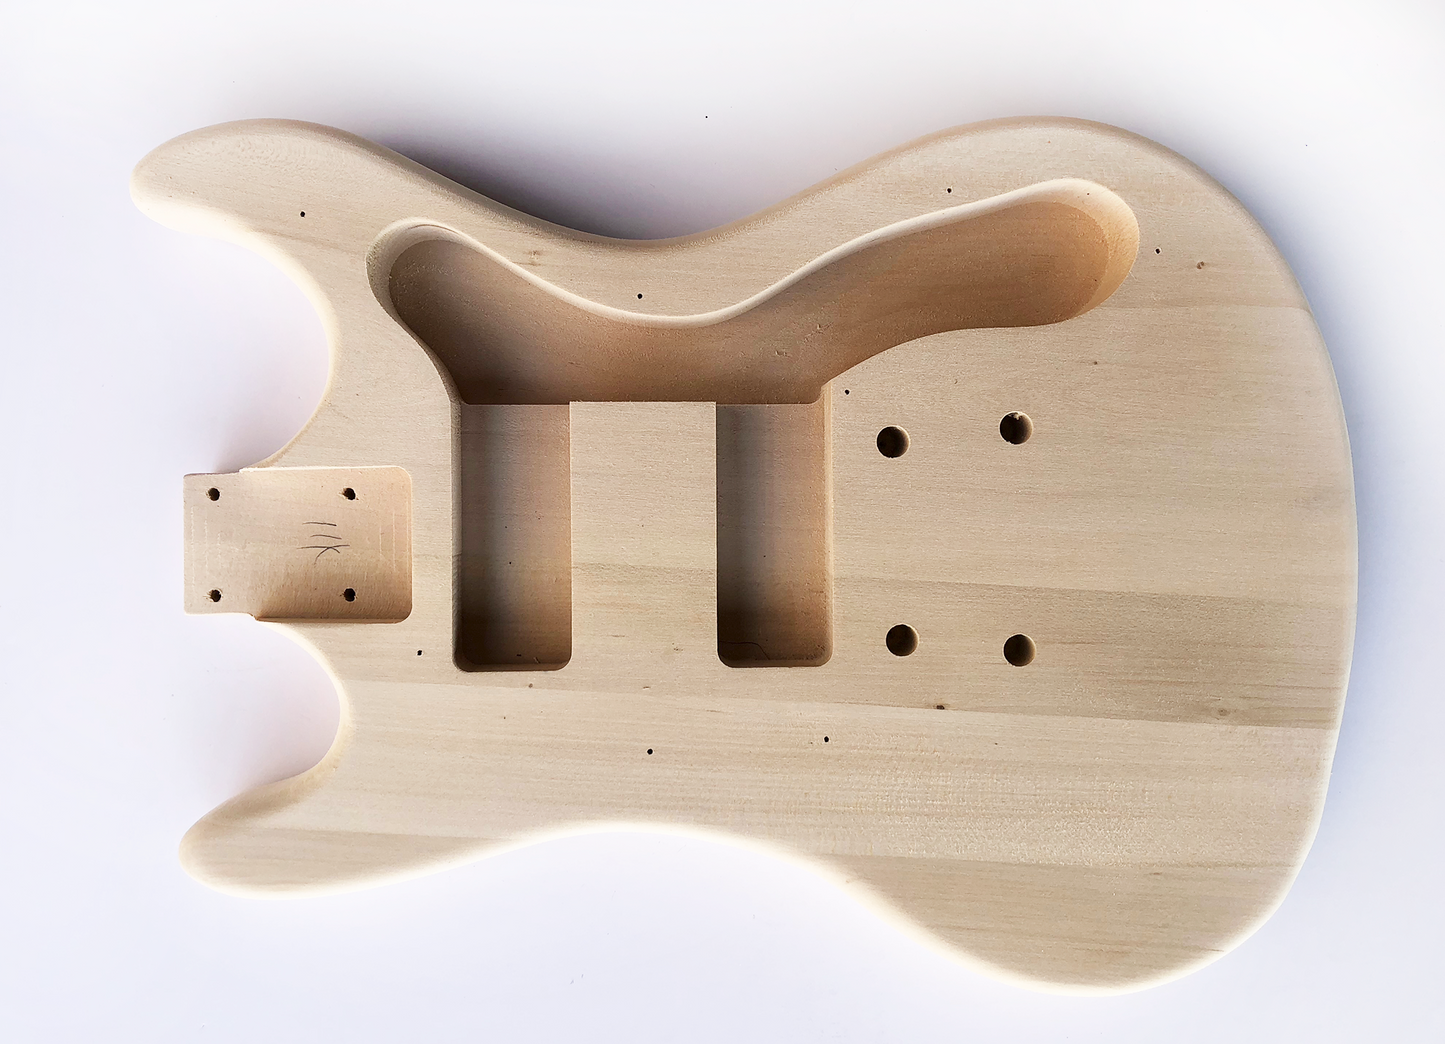 MR Build Your Own Guitar Kit